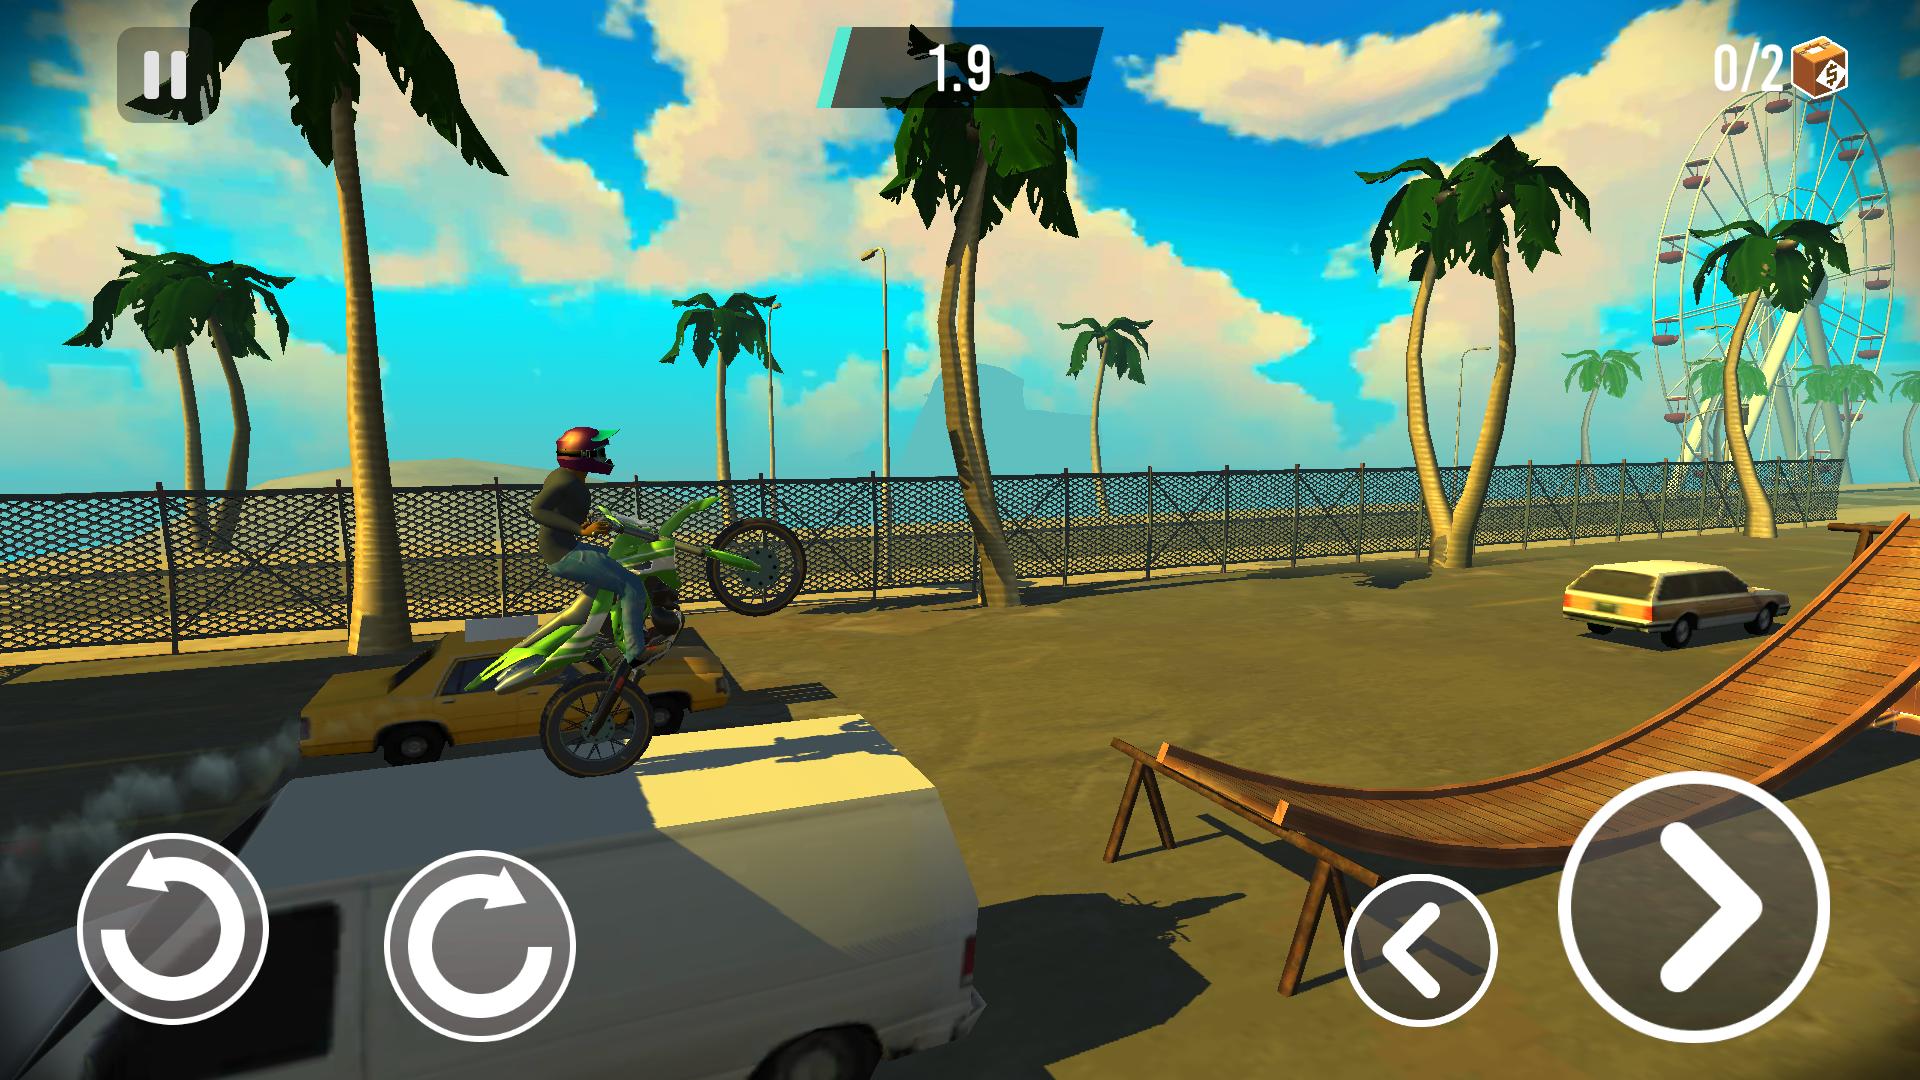 Gameplay of the Stunt Bike Extreme for Android phone or tablet.